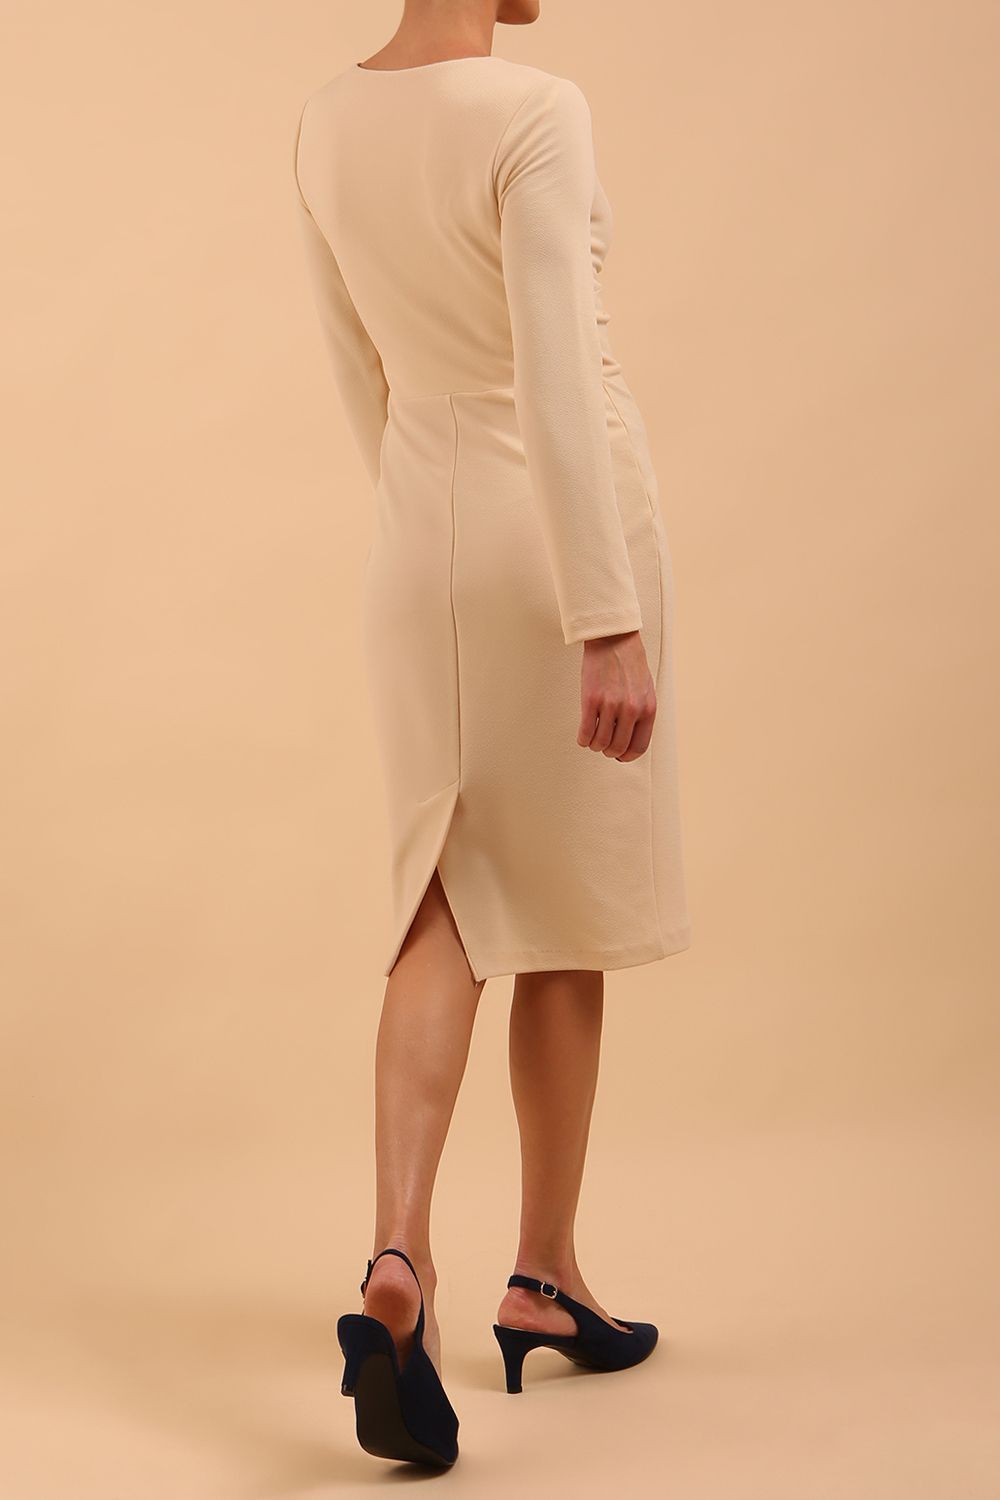 model is wearing diva catwalk gately pencil dress with long sleeves and twisted low v-neck in sandshell beige back